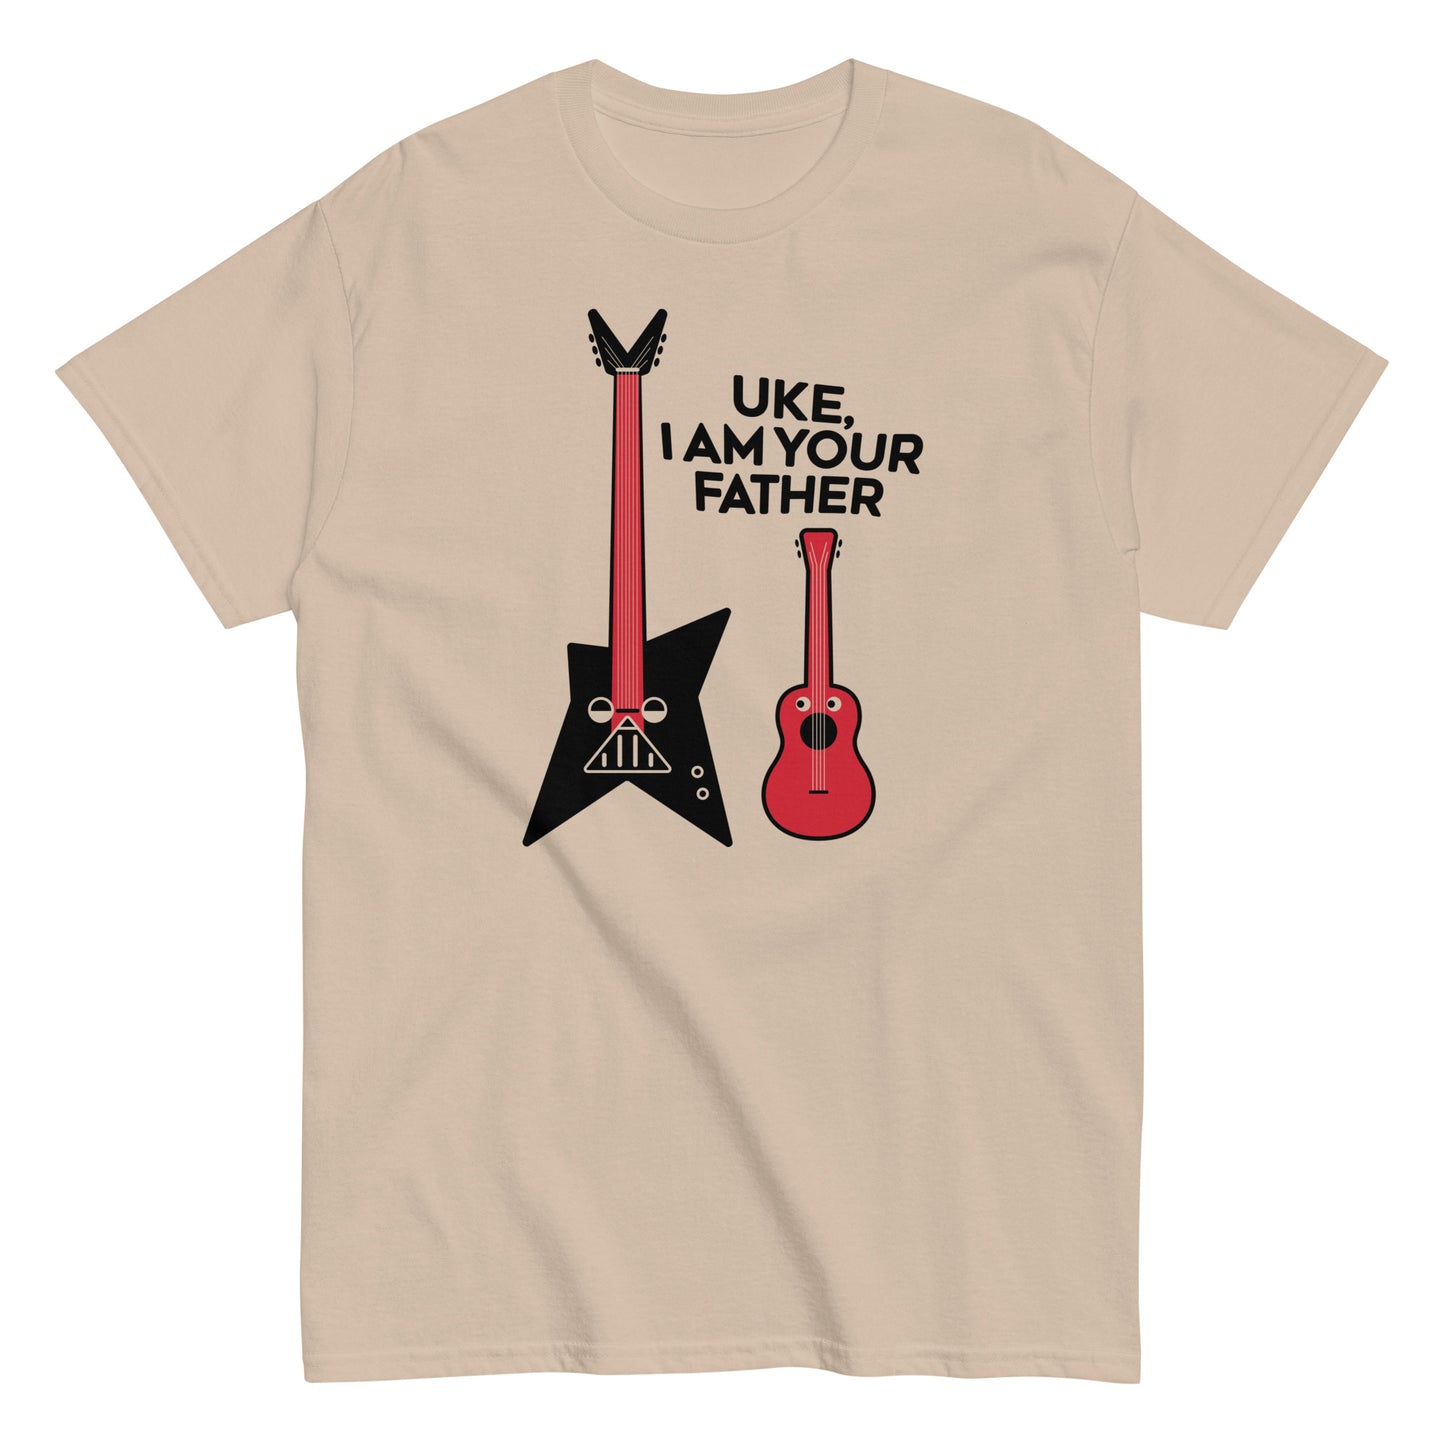 Uke, I Am Your Father Men's Classic Tee